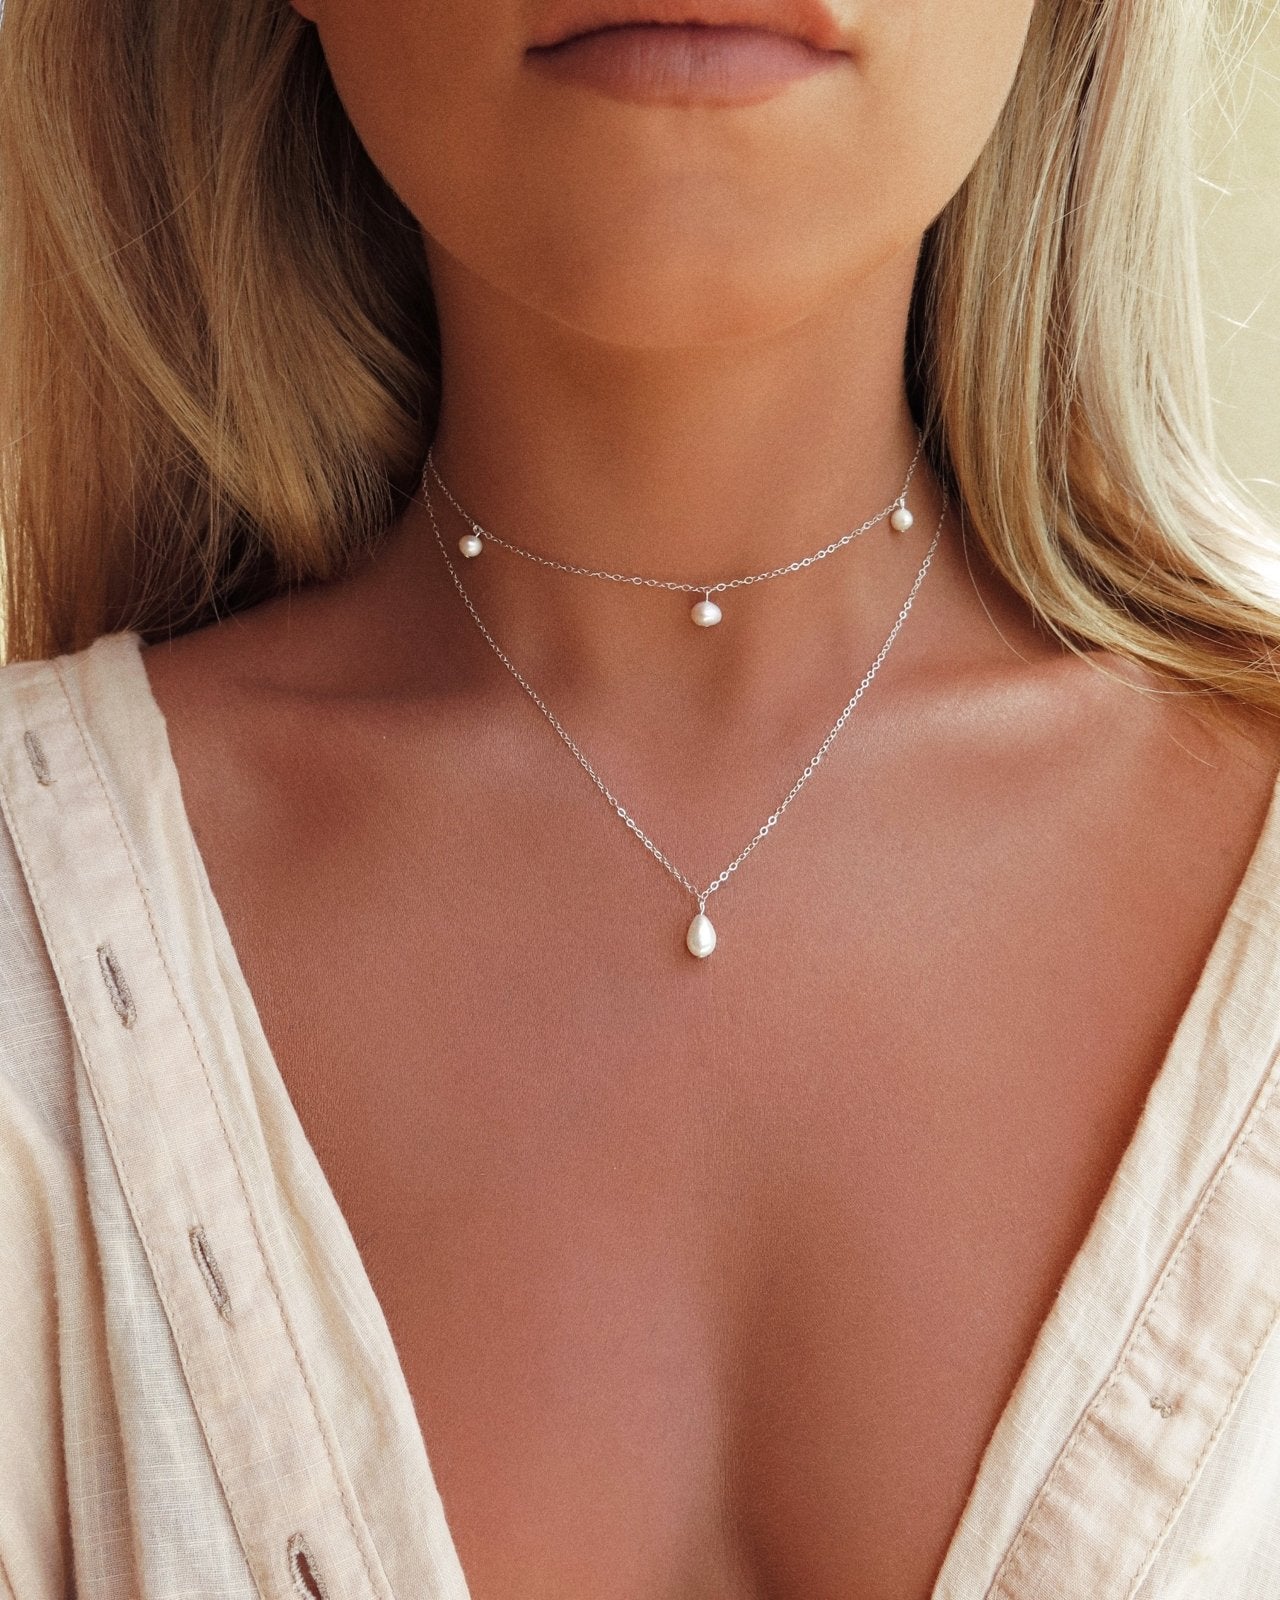 Load image into Gallery viewer, TEARDROP FRESHWATER PEARL NECKLACE- Sterling Silver - The Littl - Deluxe Chain - 37cm (choker)
